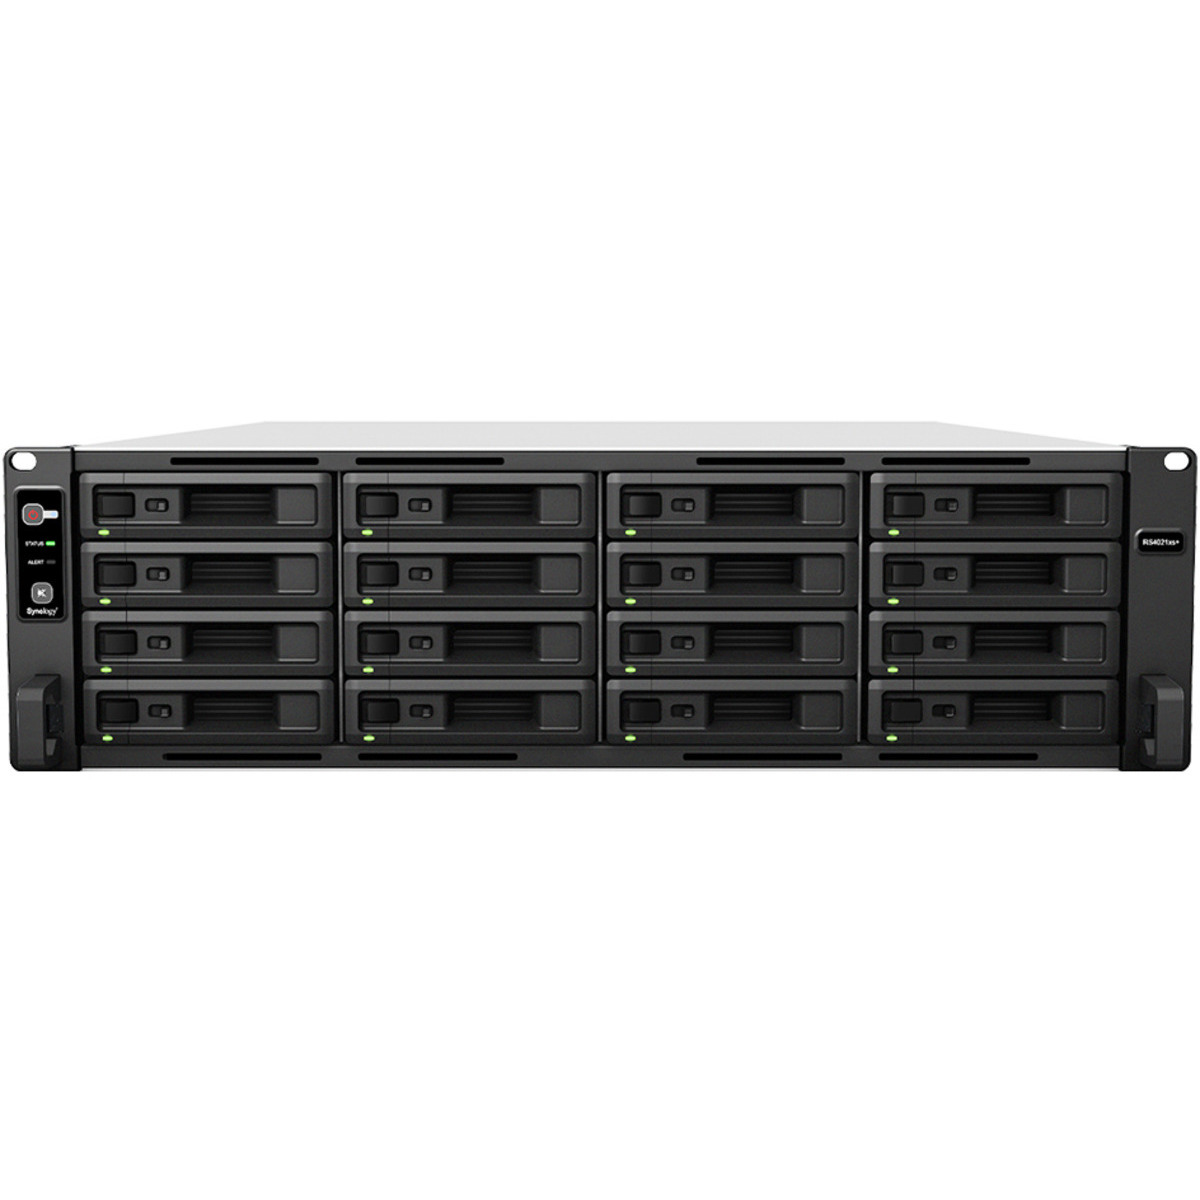 Synology RackStation RS4021xs+ 56tb 16-Bay RackMount Large Business / Enterprise NAS - Network Attached Storage Device 14x4tb Seagate BarraCuda ST4000DM004 3.5 7200rpm SATA 6Gb/s HDD CONSUMER Class Drives Installed - Burn-In Tested RackStation RS4021xs+